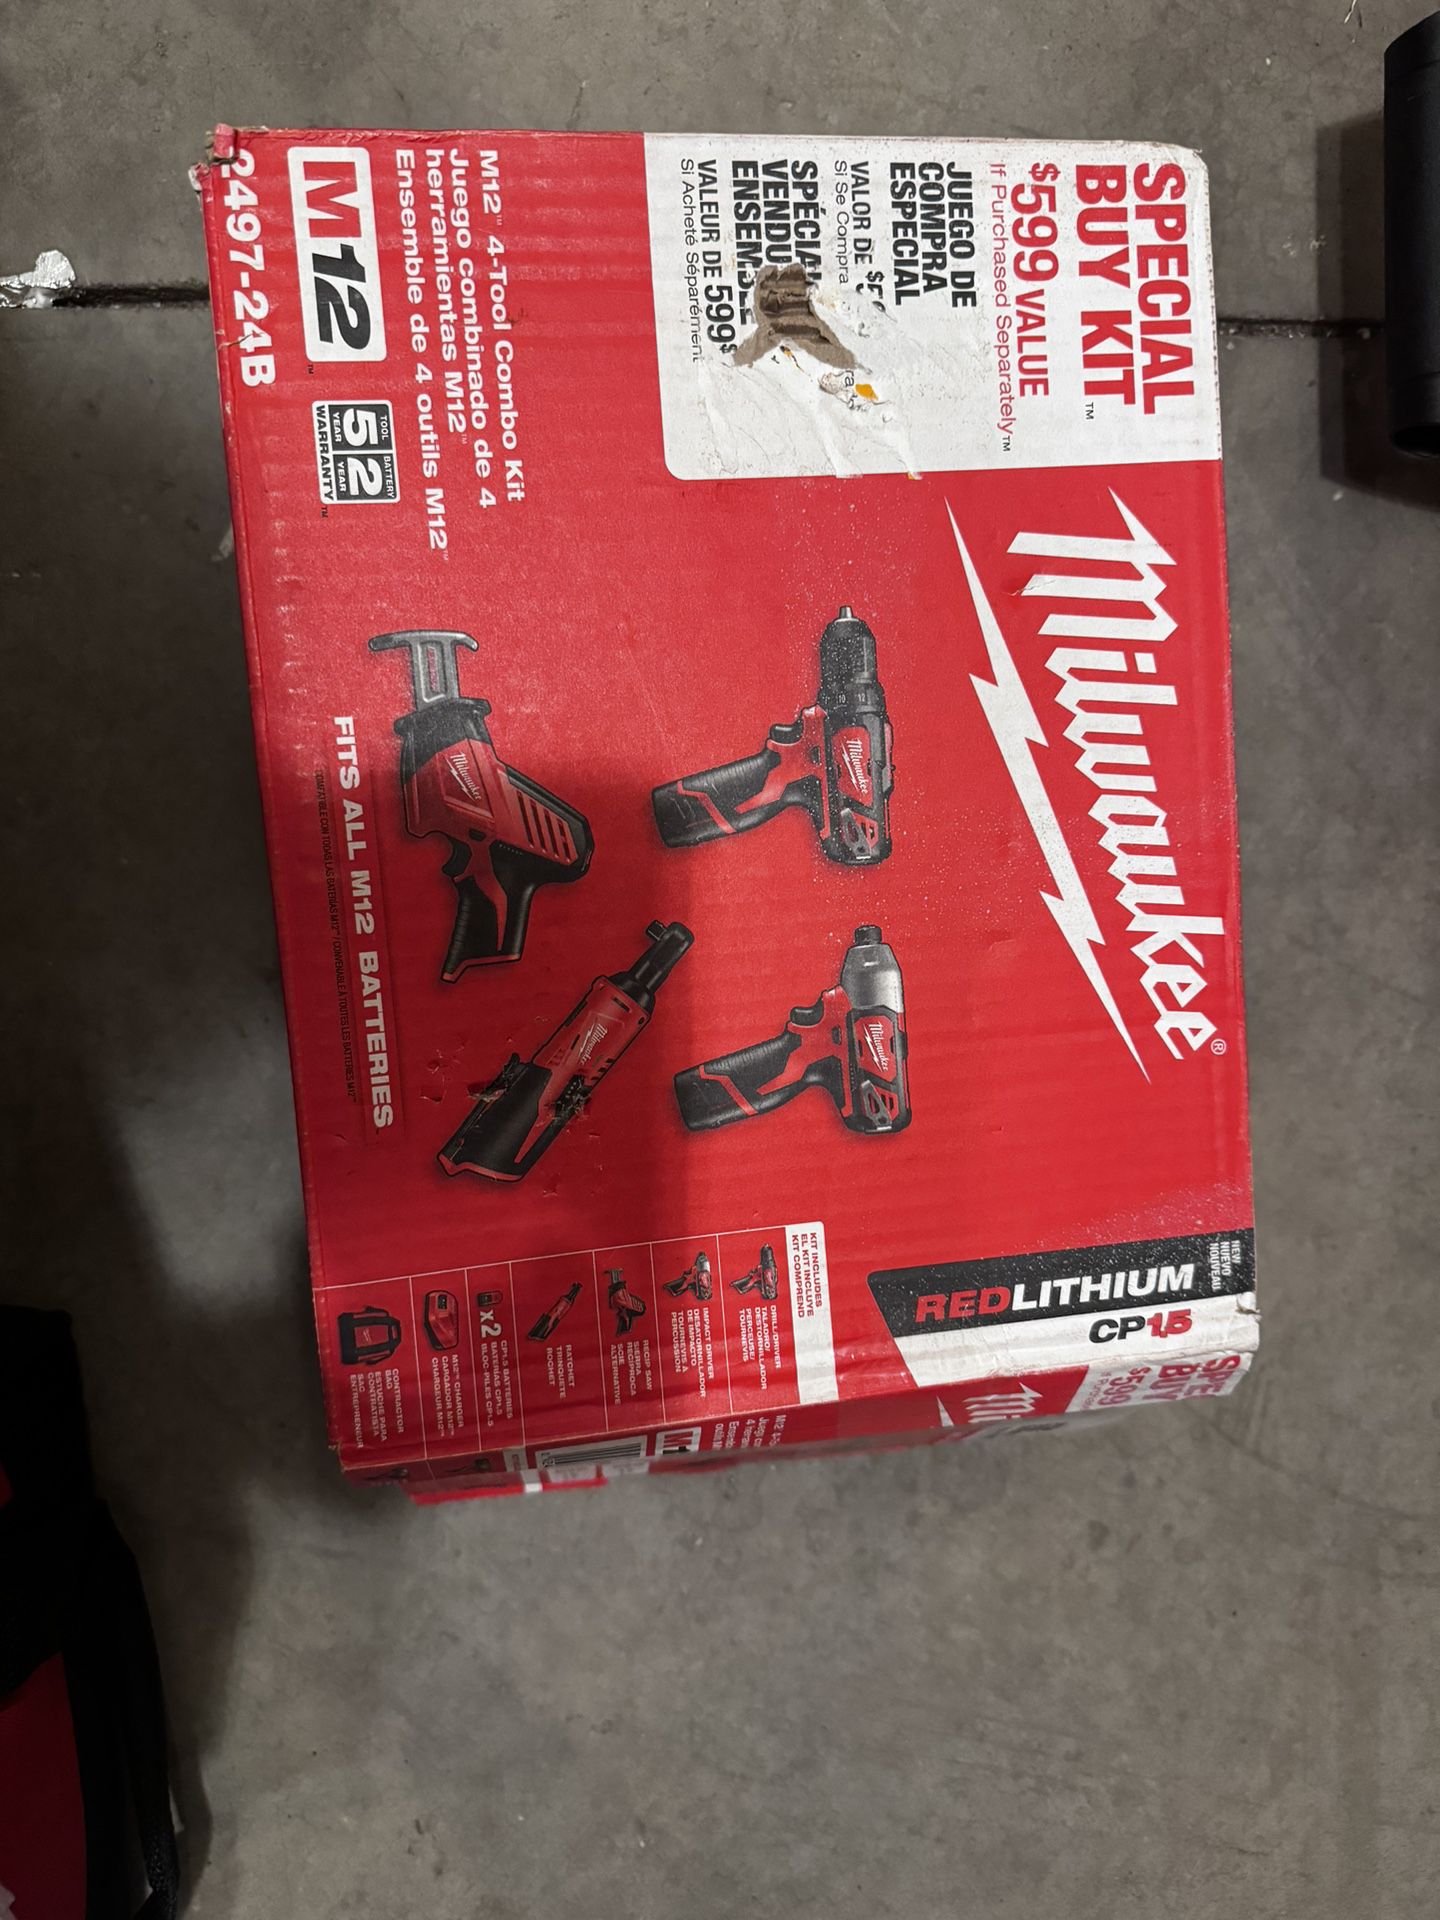 Milwaukee M12 12V Lithium-Ion Cordless Combo Kit (4-Tool) w/(2) 1.5Ah Batteries, (1) Charger, (1) Tool Bag